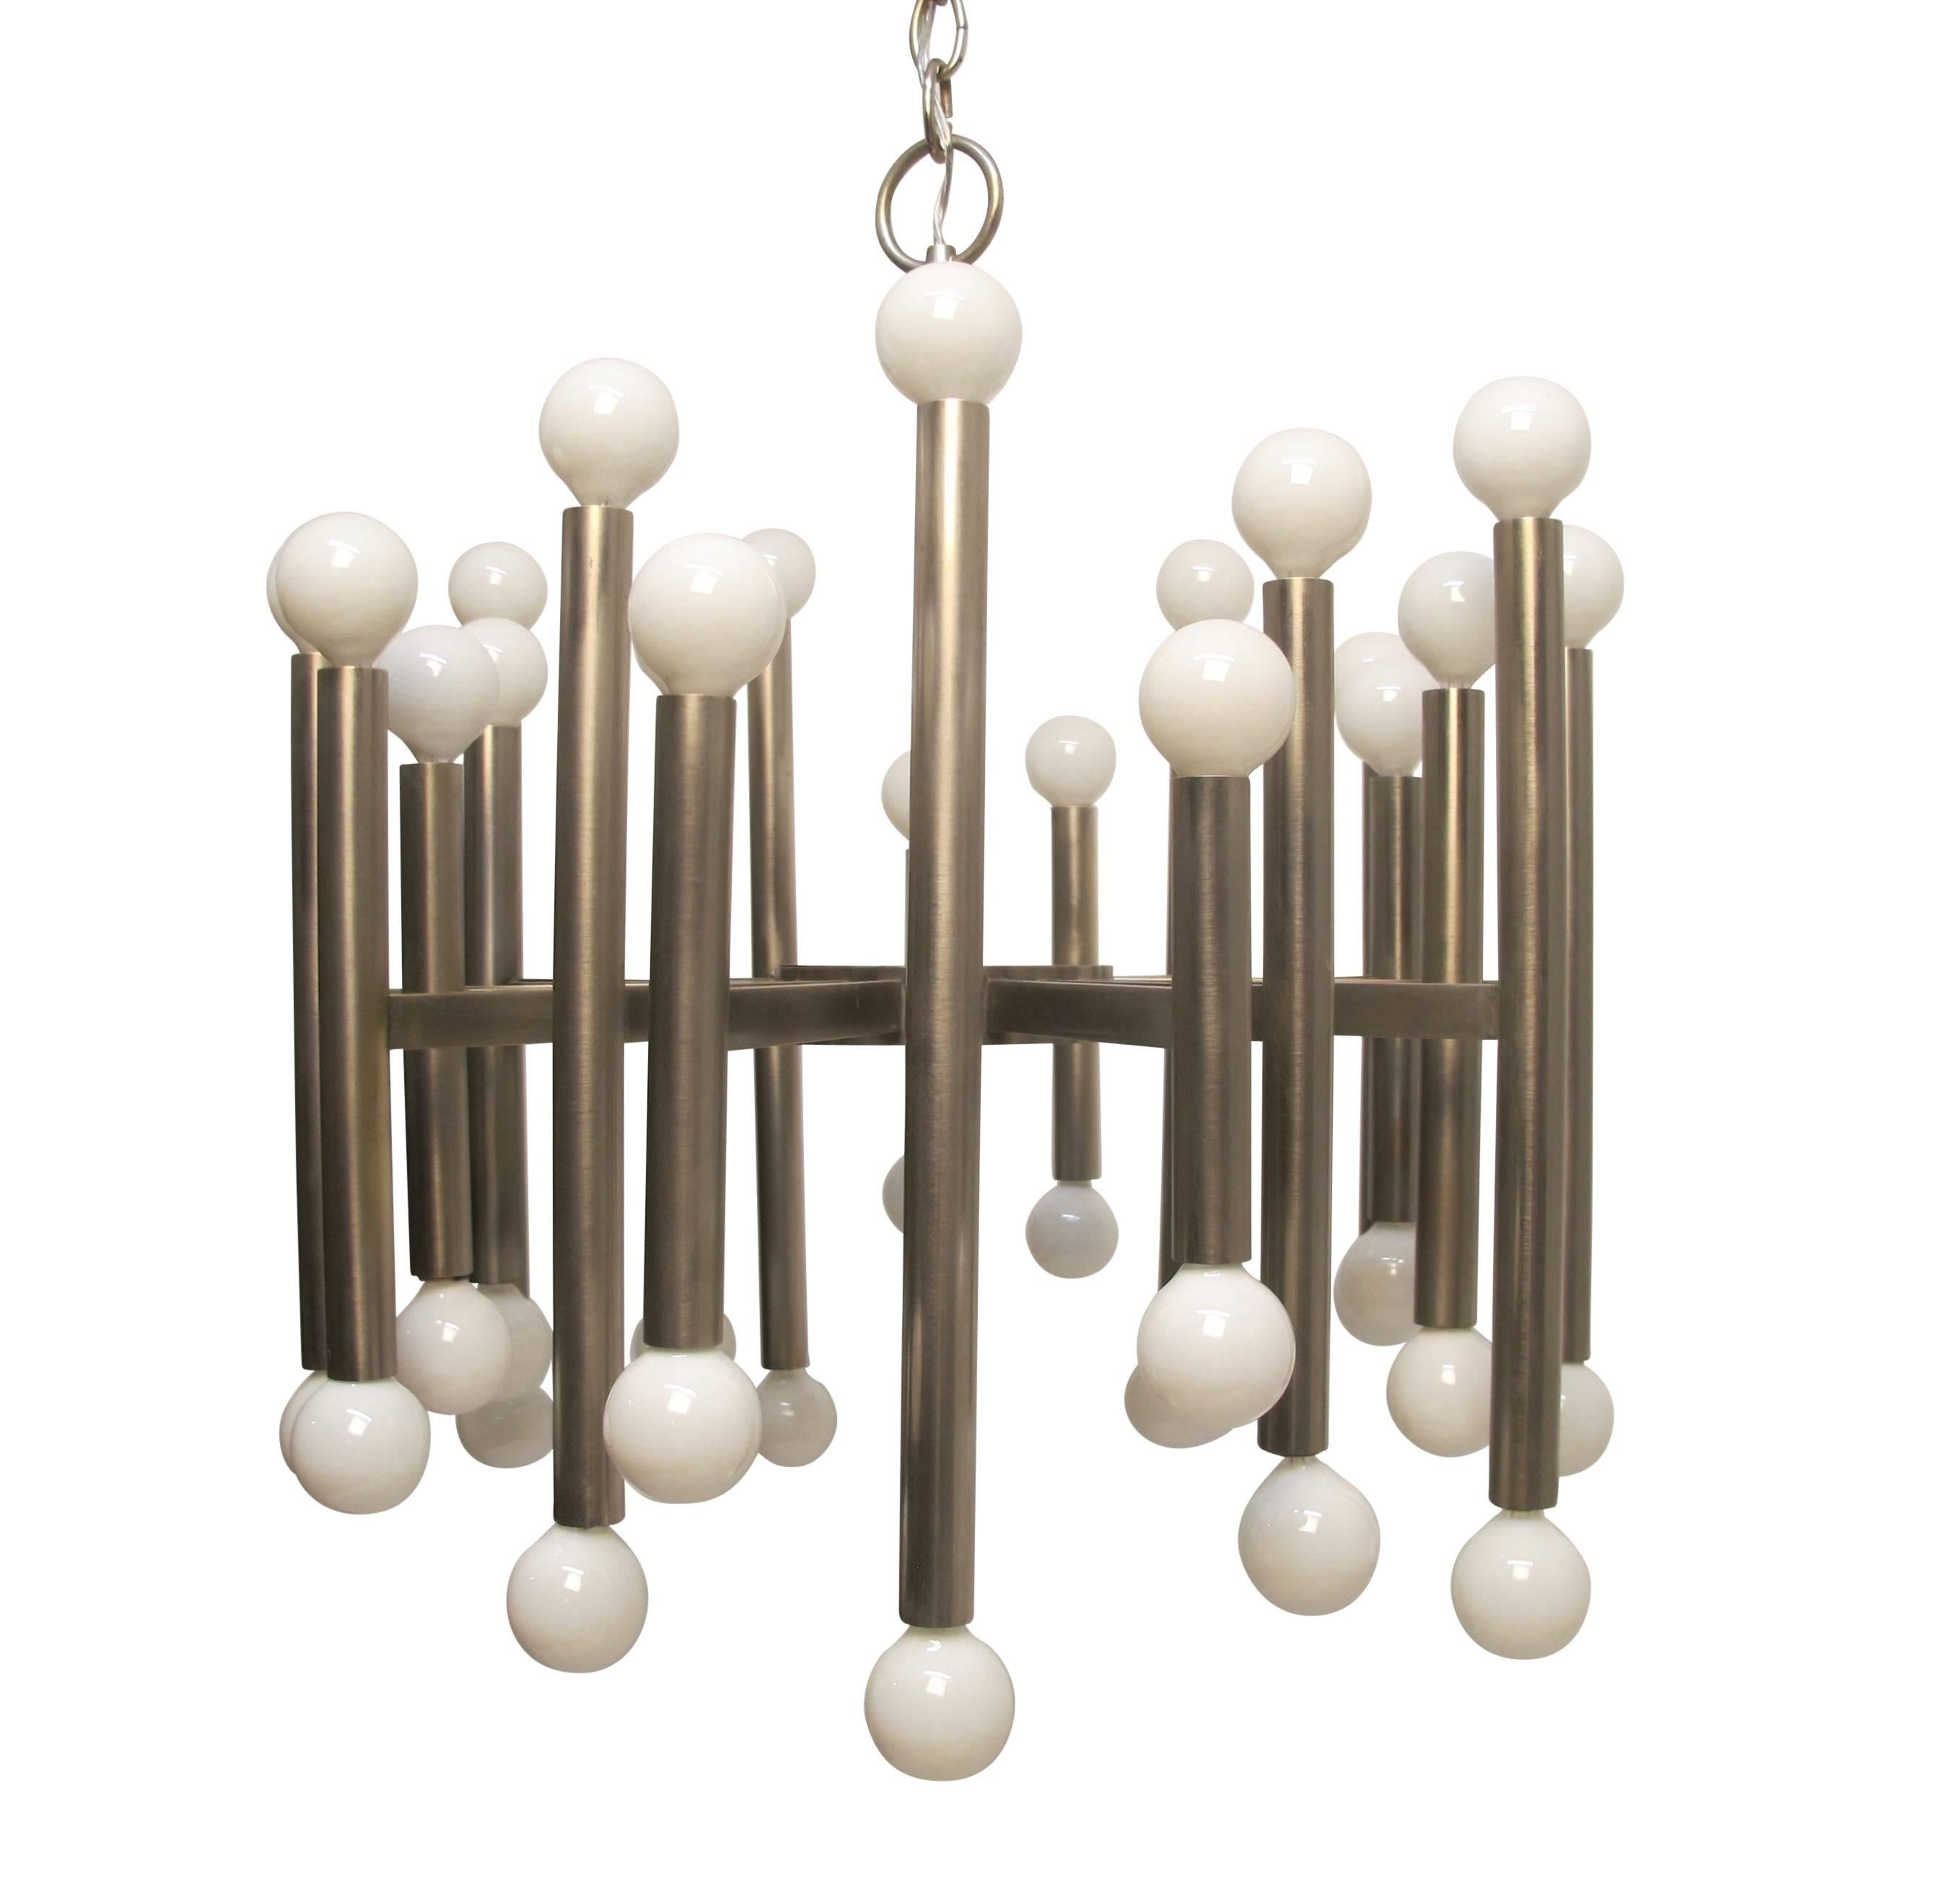 A Gaetano Sciolari brushed stainless steel twenty-arm light fixture with sockets at each end of the extended tube arm. Recently refurbished and re-wired, holds chandelier base bulbs, Italy, mid-20th century.